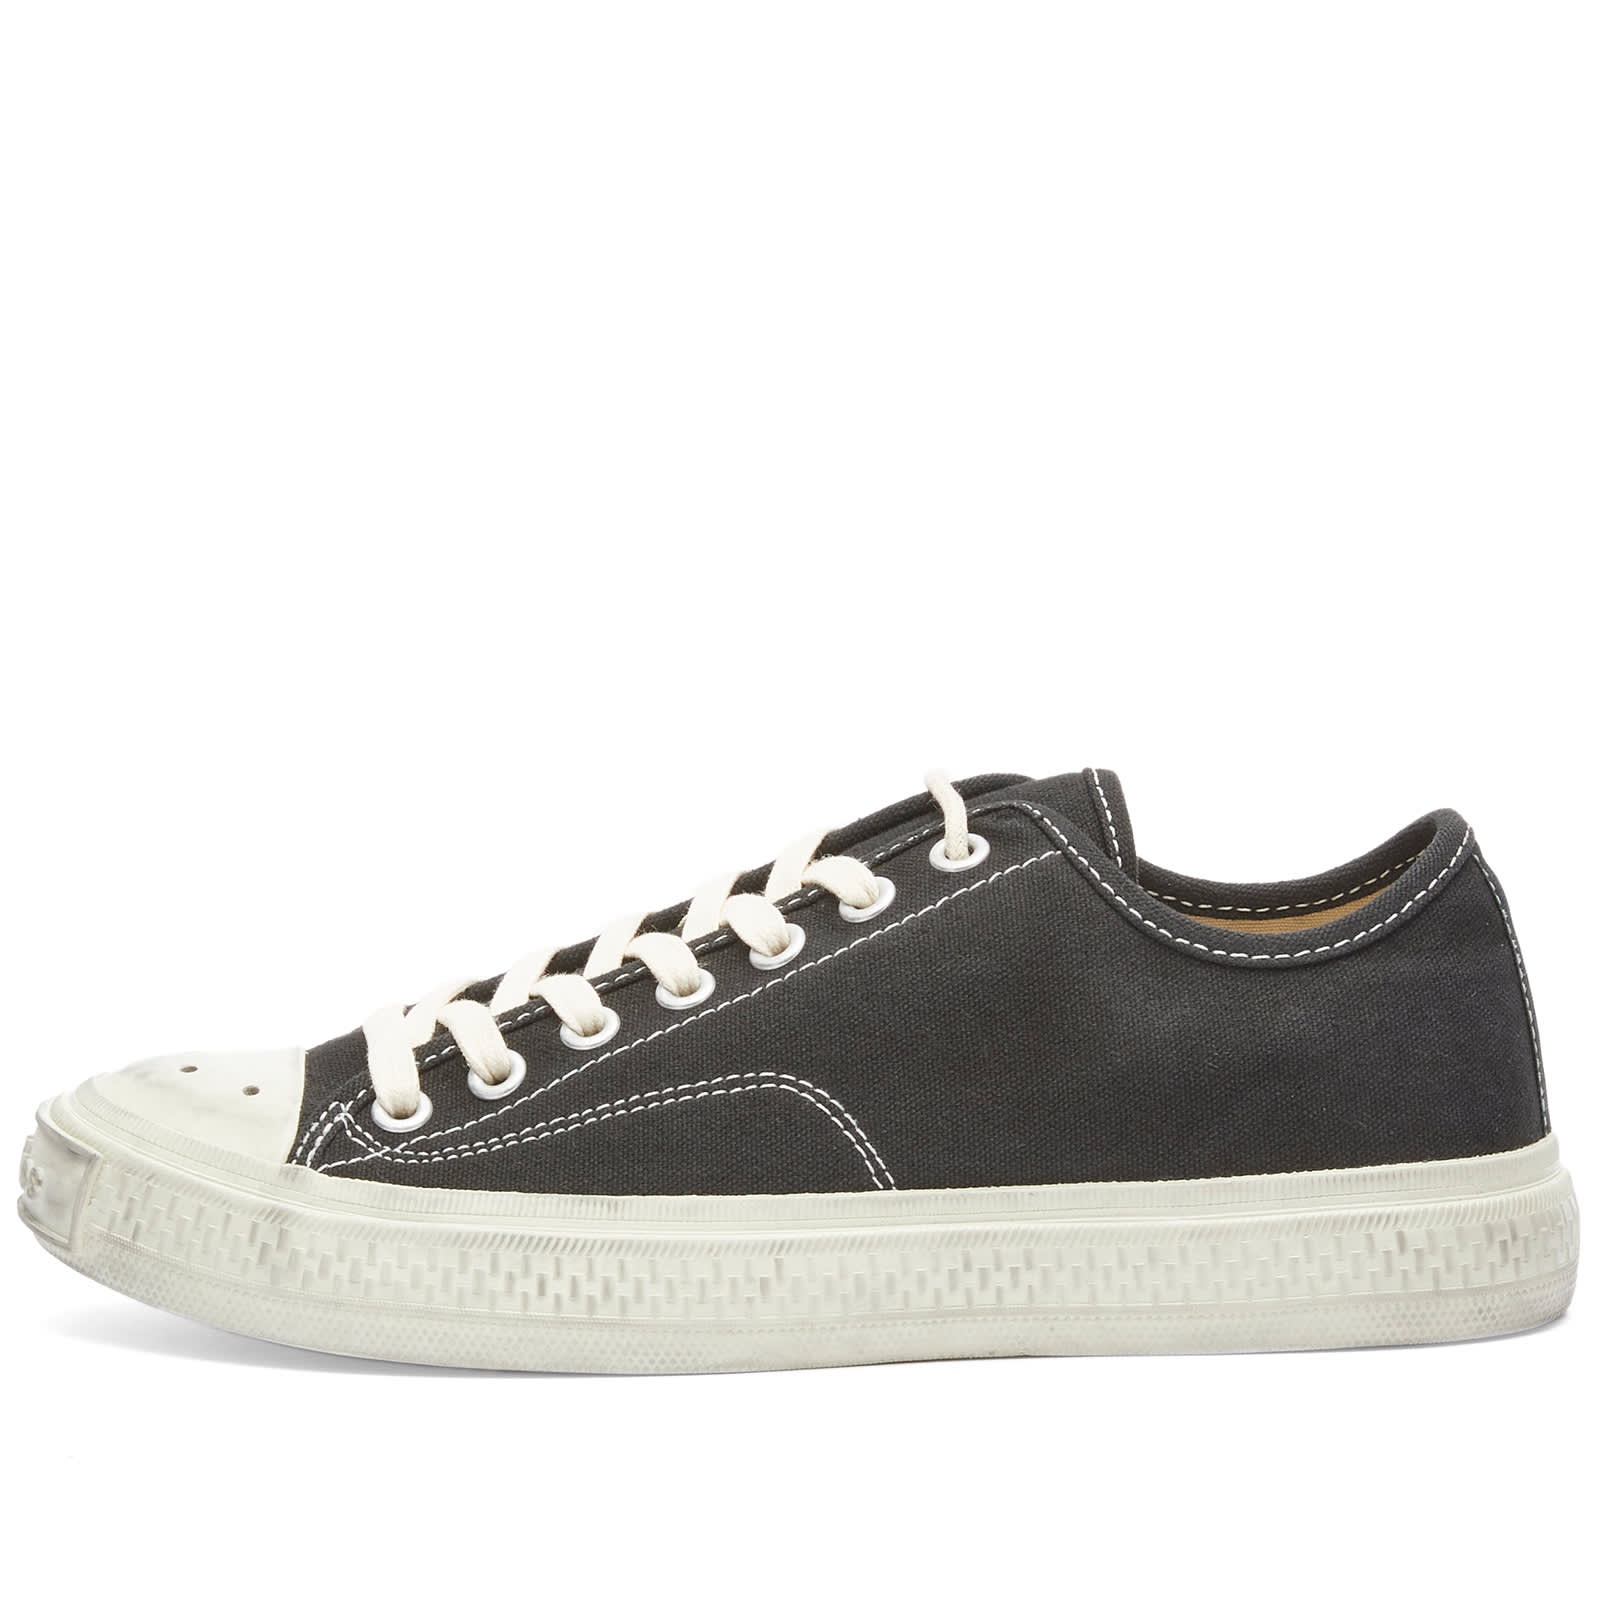 Acne Studios Ballow Soft Tumbled Tag Sneakers - 2